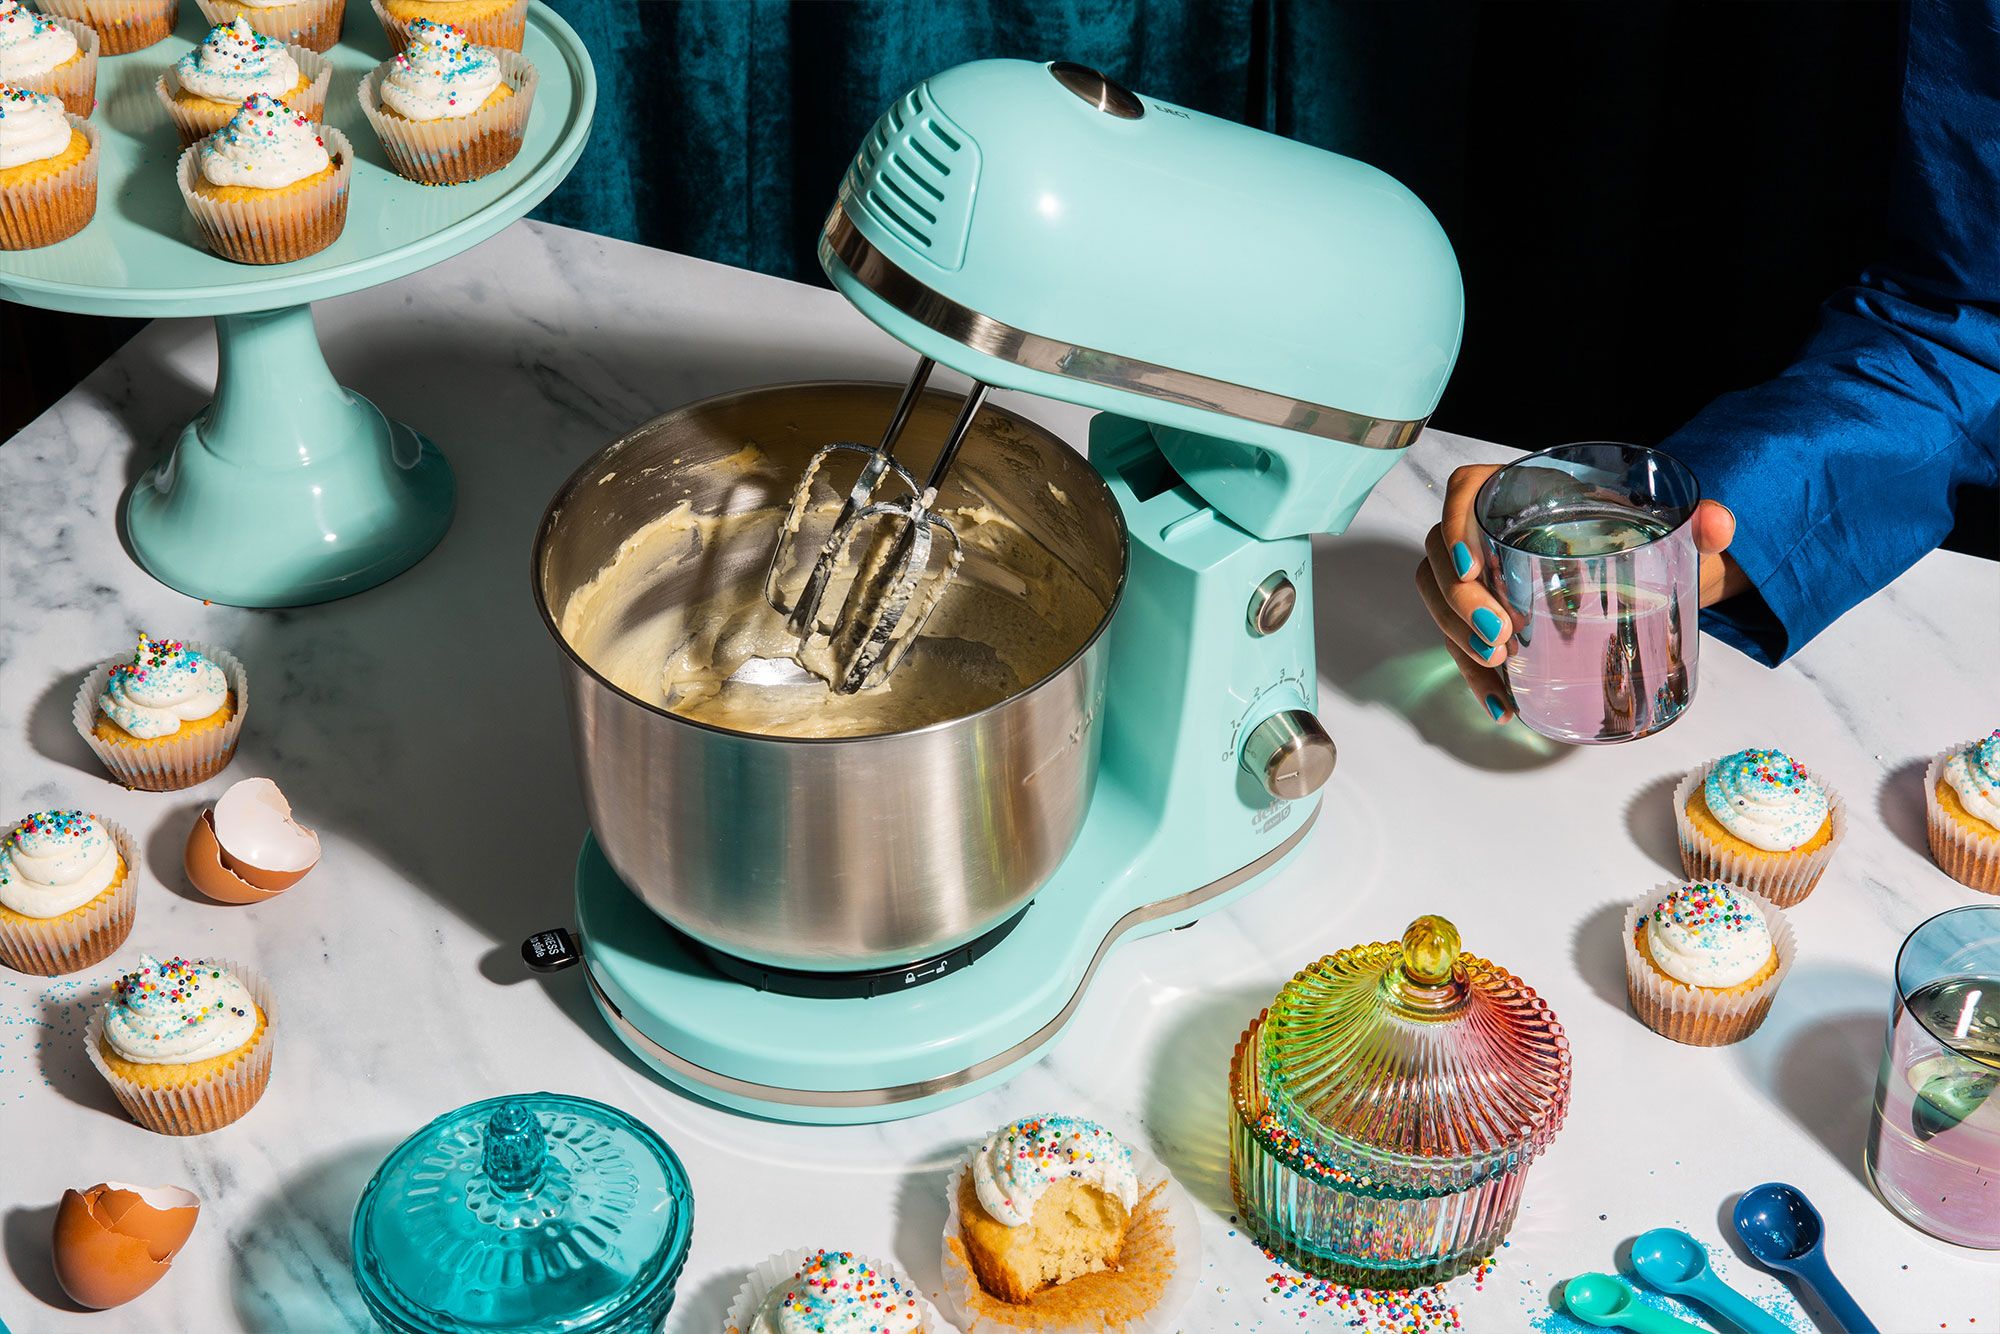 DASH Delish by DASH Compact Stand Mixer, 3.5 Quart with Beaters & Dough  Hooks Included - Blue 3.5 Quart Blue